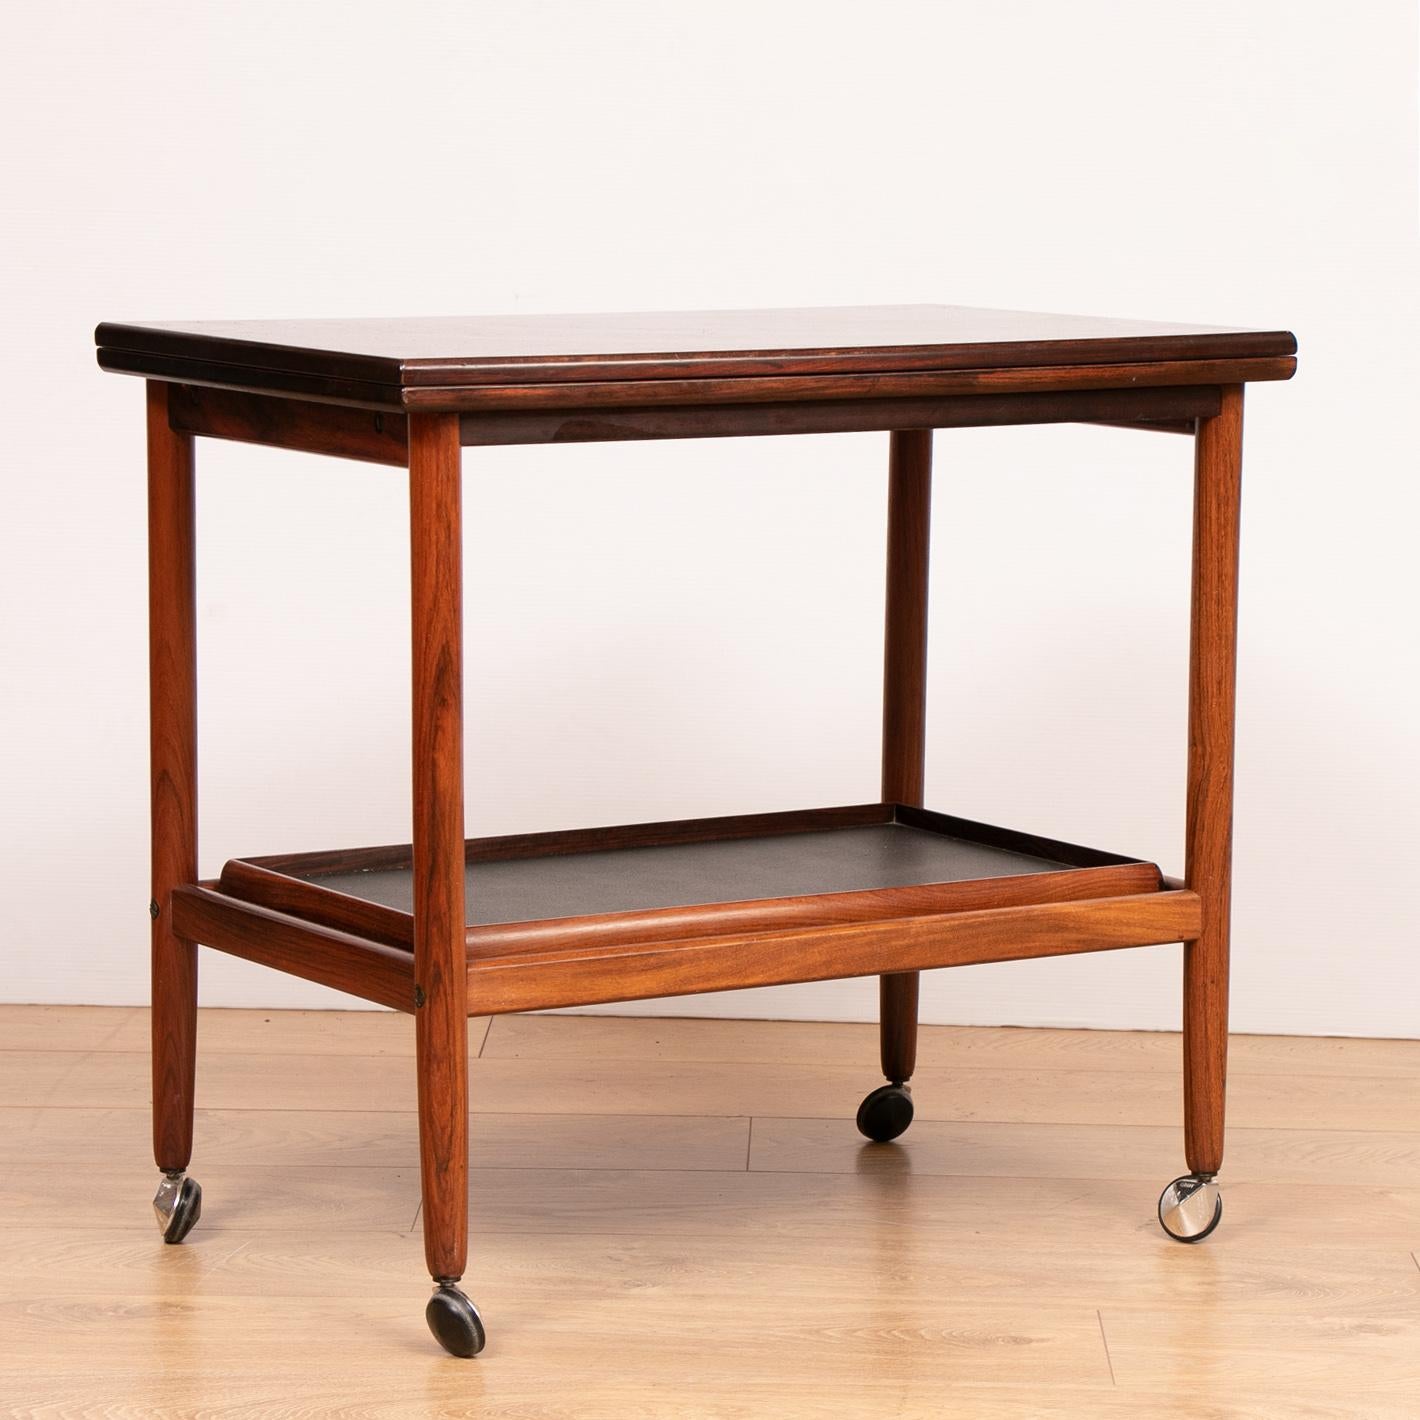 1960s Arrebo Møbler Danish rosewood folding top serving trolley or drinks/bar cart. Rare to find with a wonderful rosewood deep grain and patina.

The serving cart has a unique feature folding tabletop with brass feature fittings which turns on